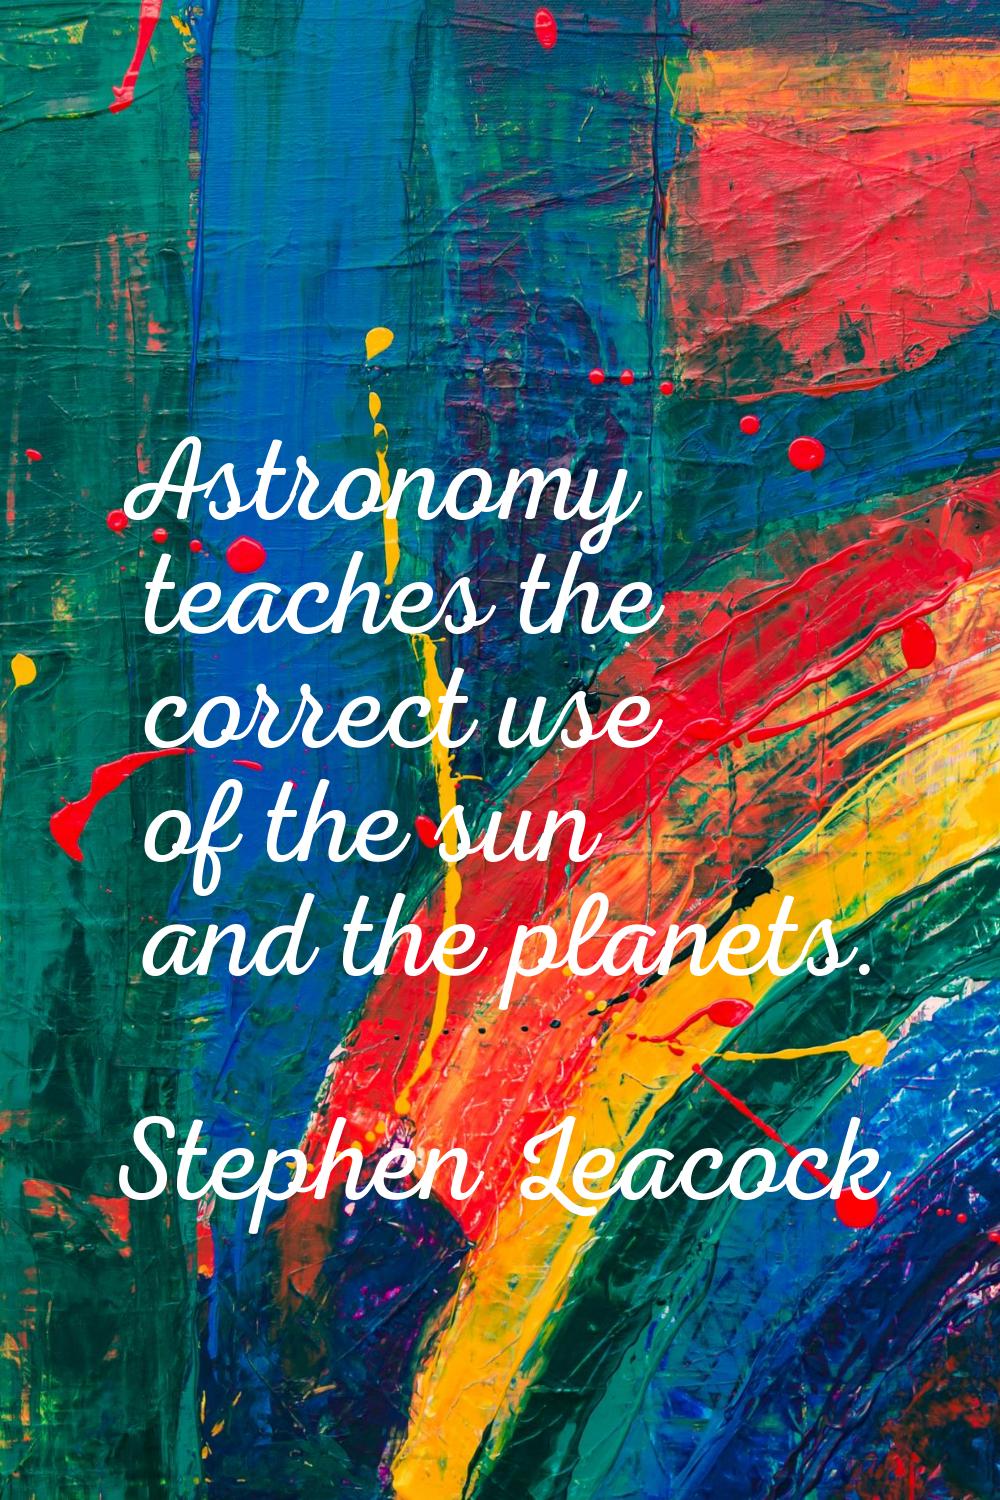 Astronomy teaches the correct use of the sun and the planets.